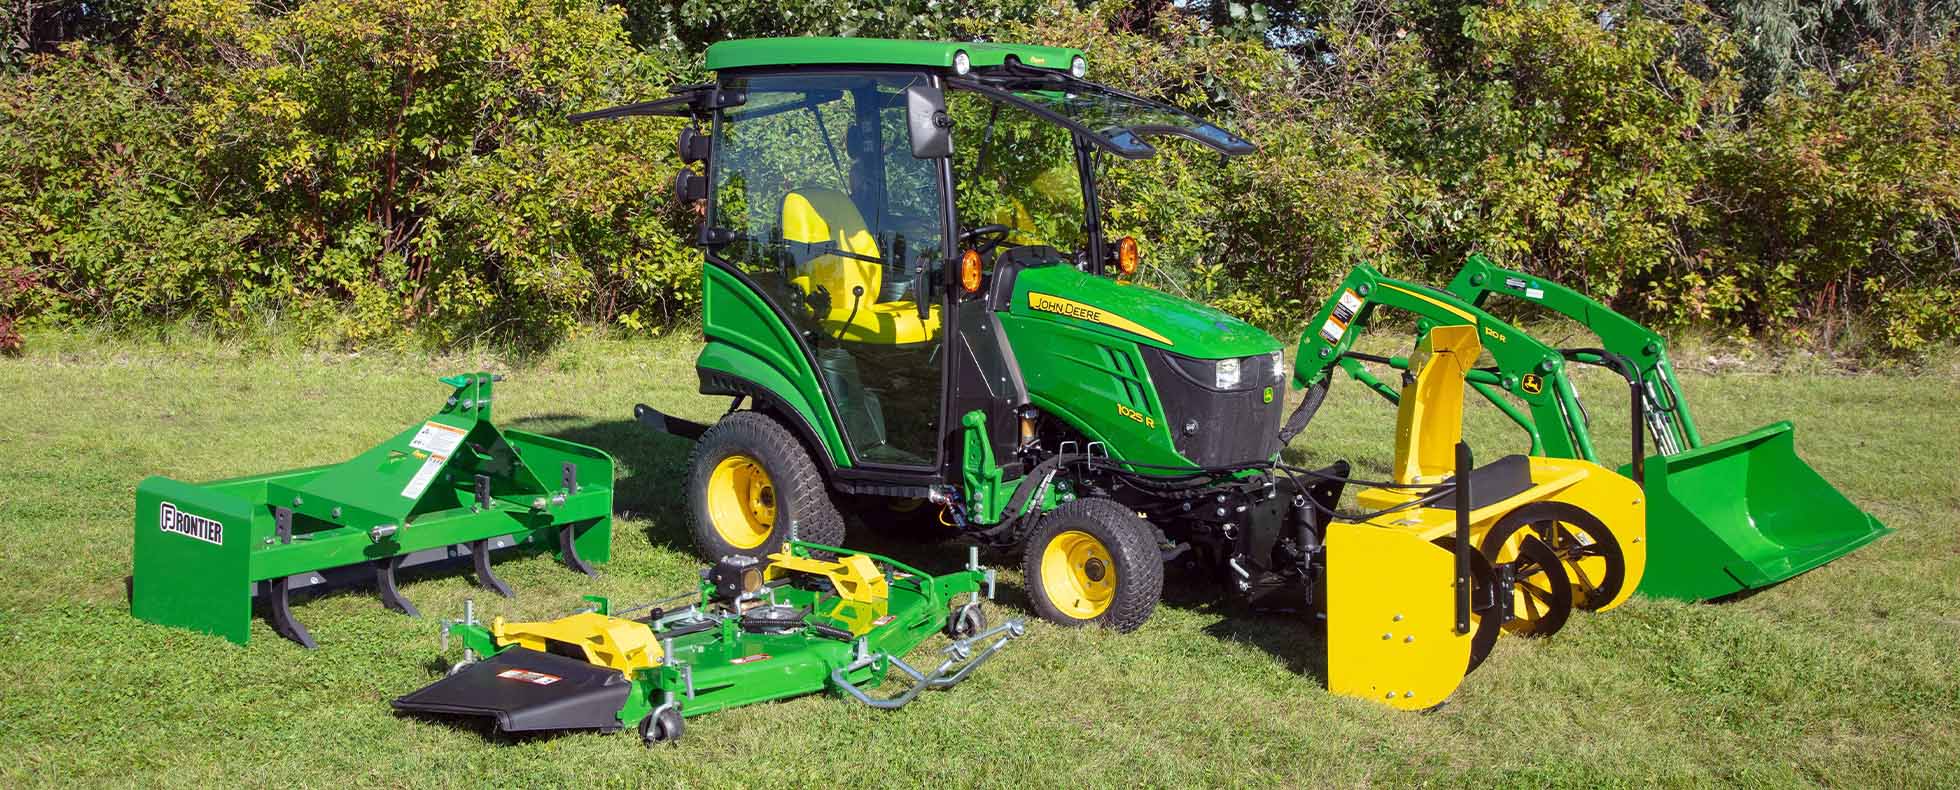 Buy These Five Compact Tractor Attachments and Accessories First